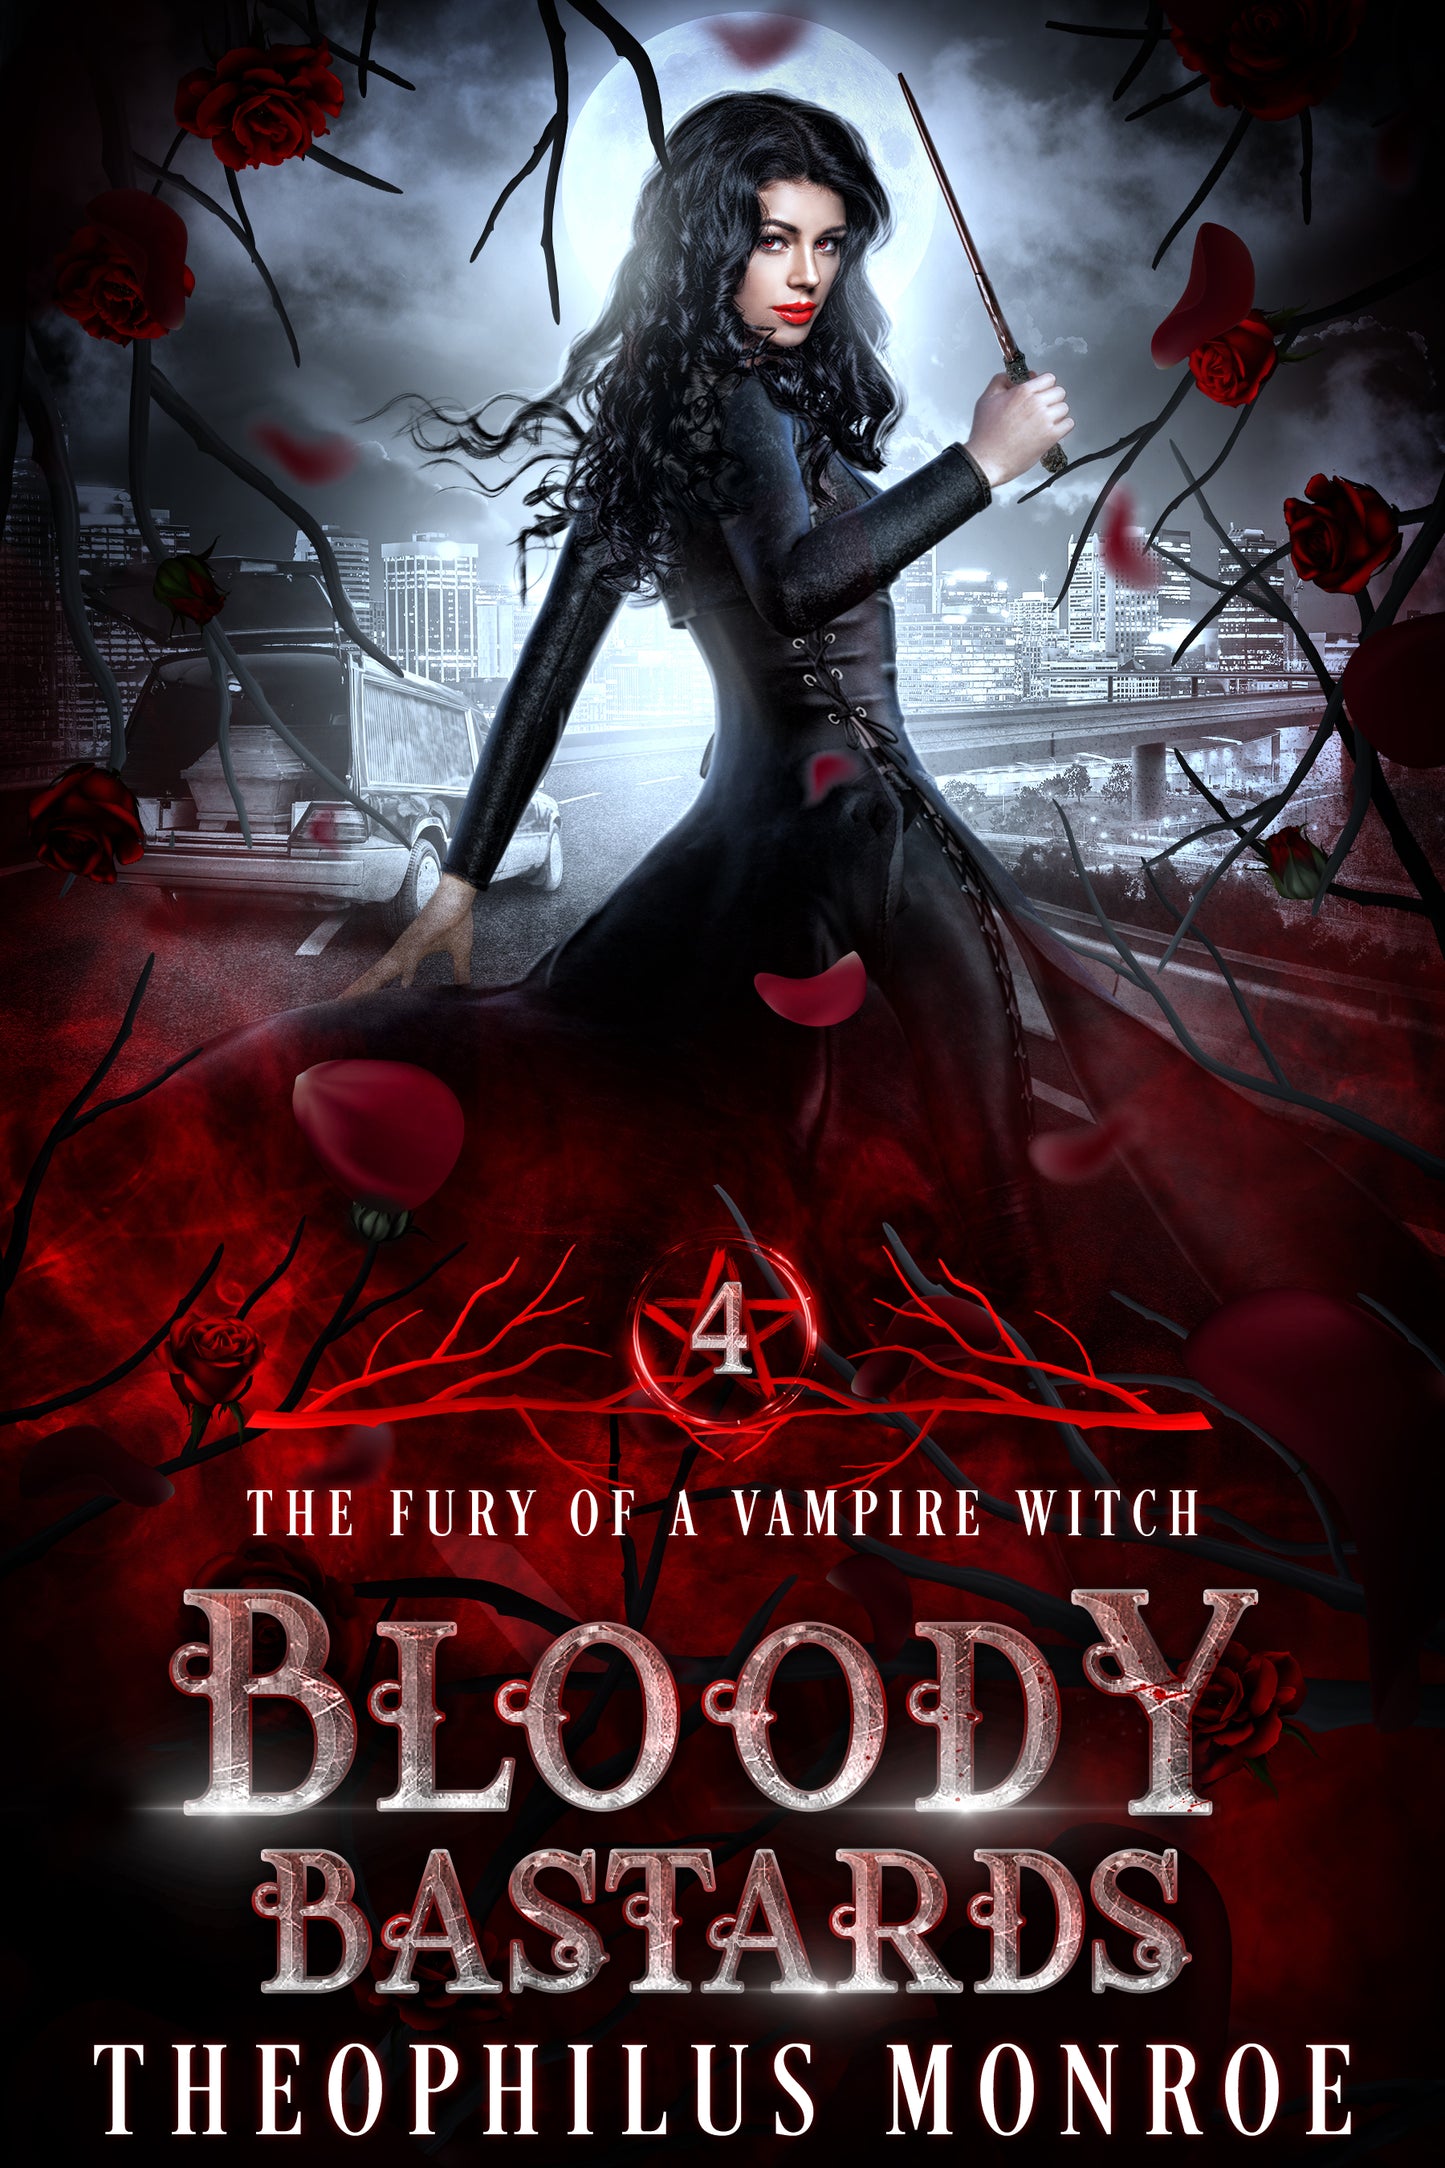 Bloody Bastards (The Fury of a Vampire Witch #4)